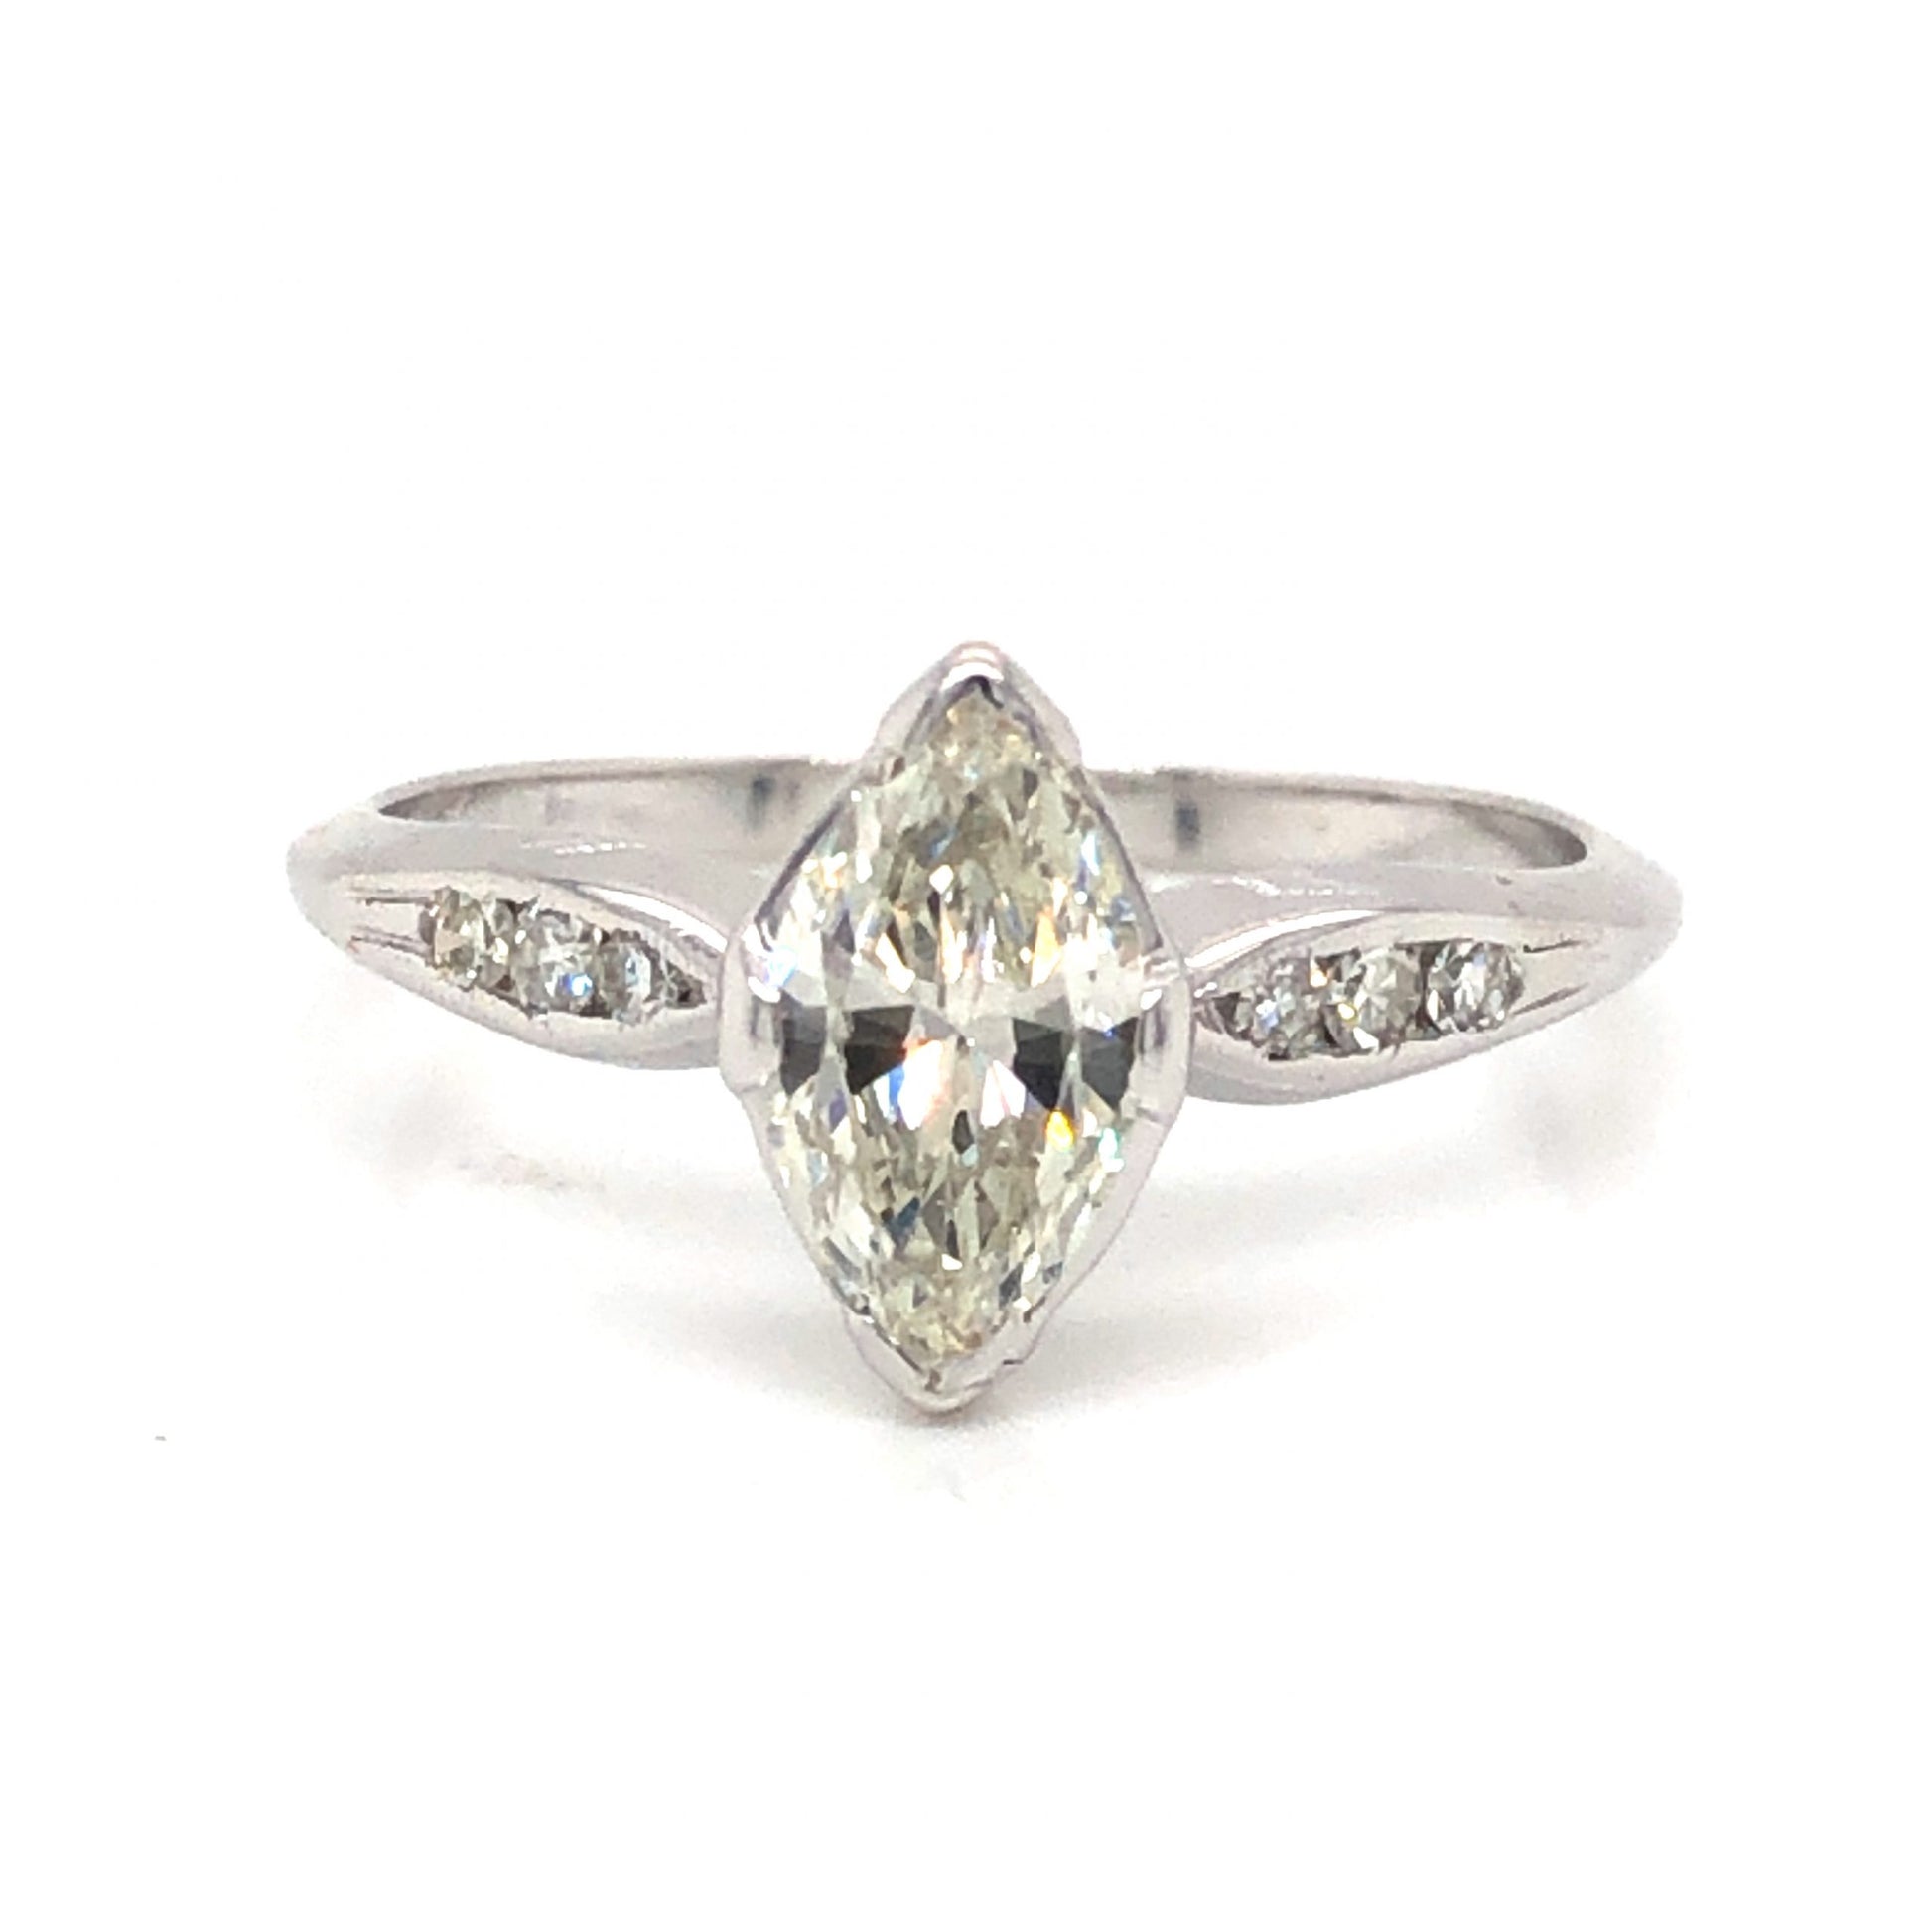 .75 Art Deco Marquise Diamond Engagement Ring in 18k White GoldComposition: 18 Karat White Gold Ring Size: 7 Total Diamond Weight: .955ct Total Gram Weight: 2.5 g Inscription: K & P , 18K
      